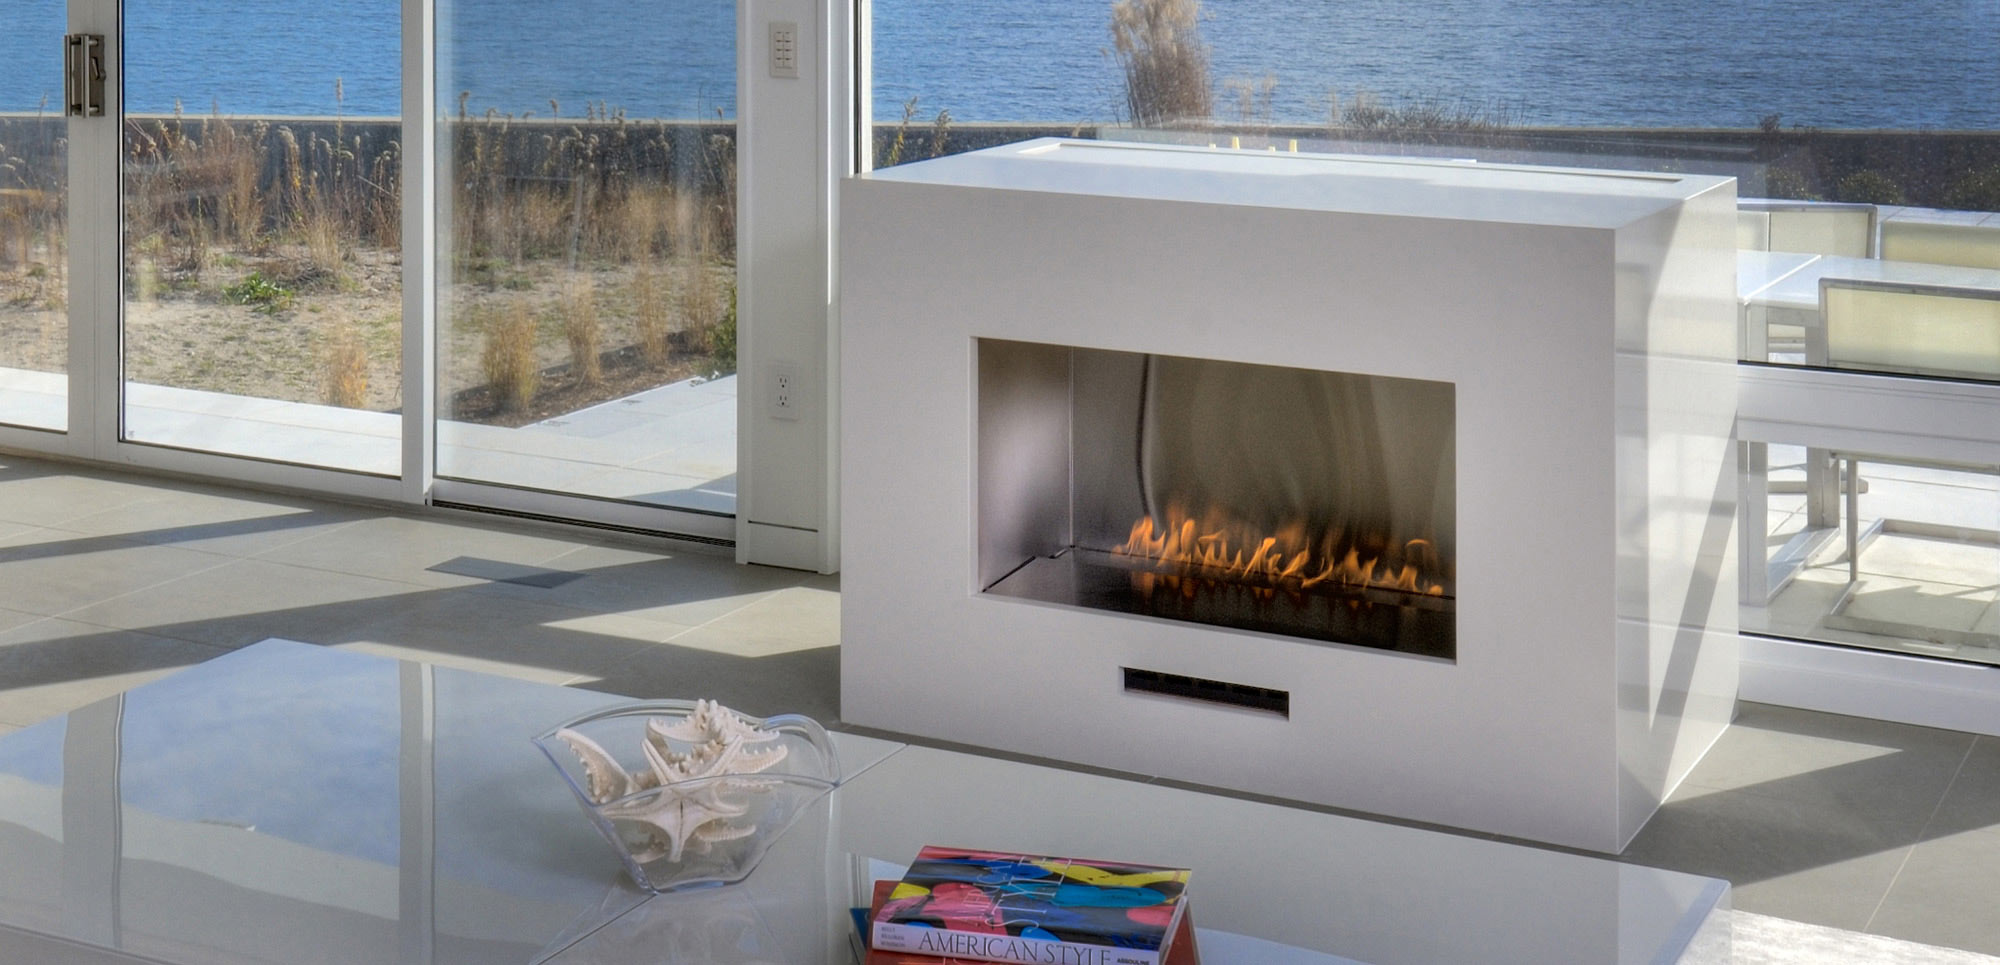 18 Inch Electric Fireplace Insert Unique Spark Modern Fires